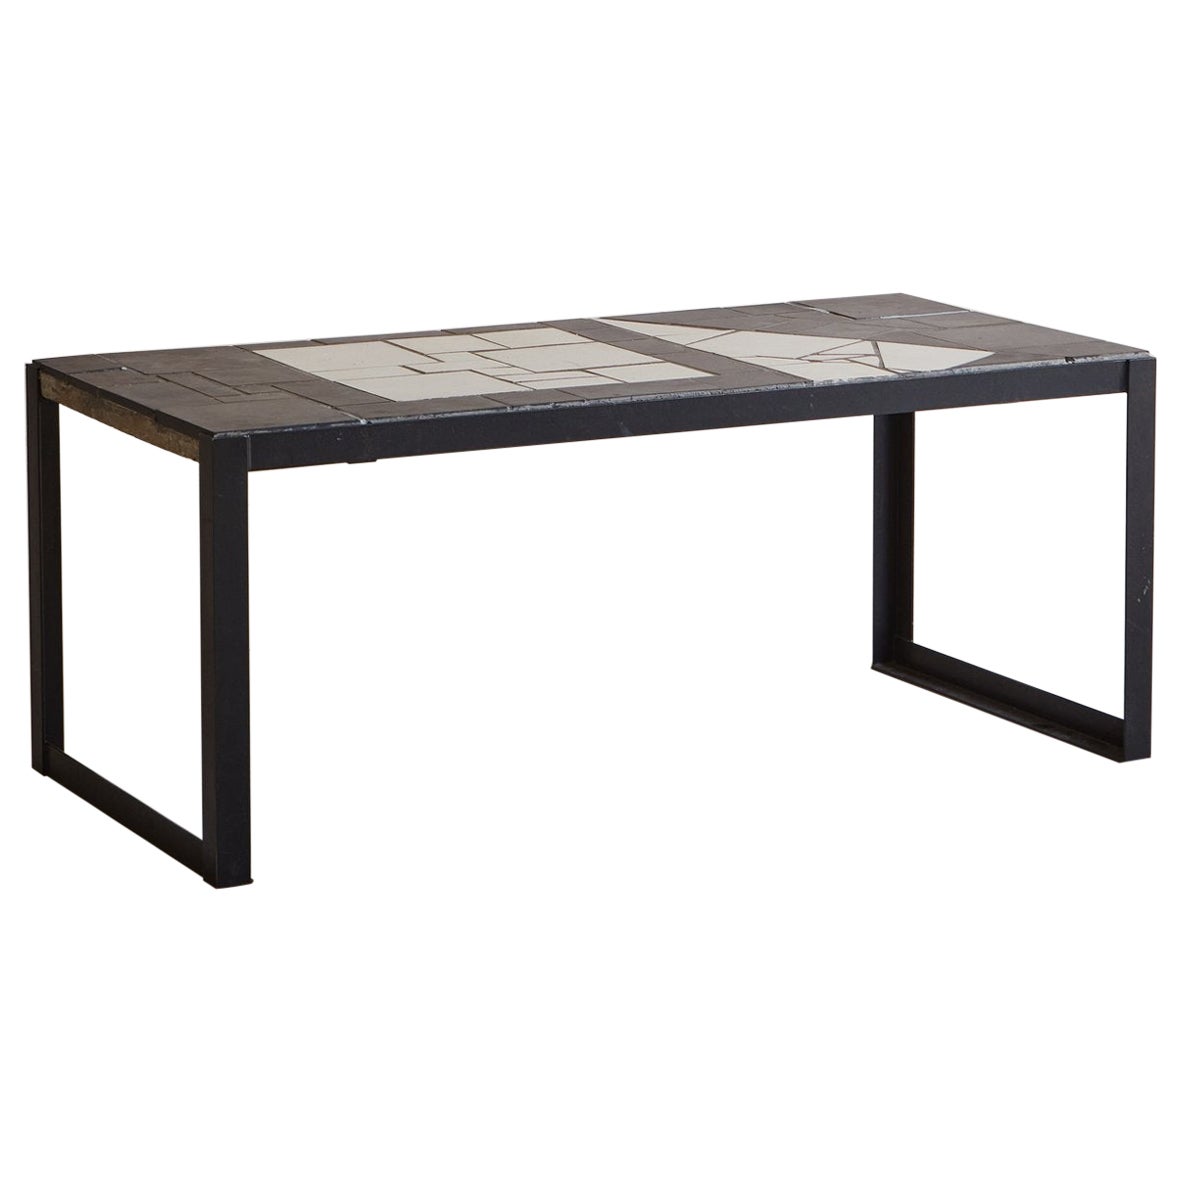 Black + White Tile Coffee Table with Metal Base, Switzerland 20th Century For Sale